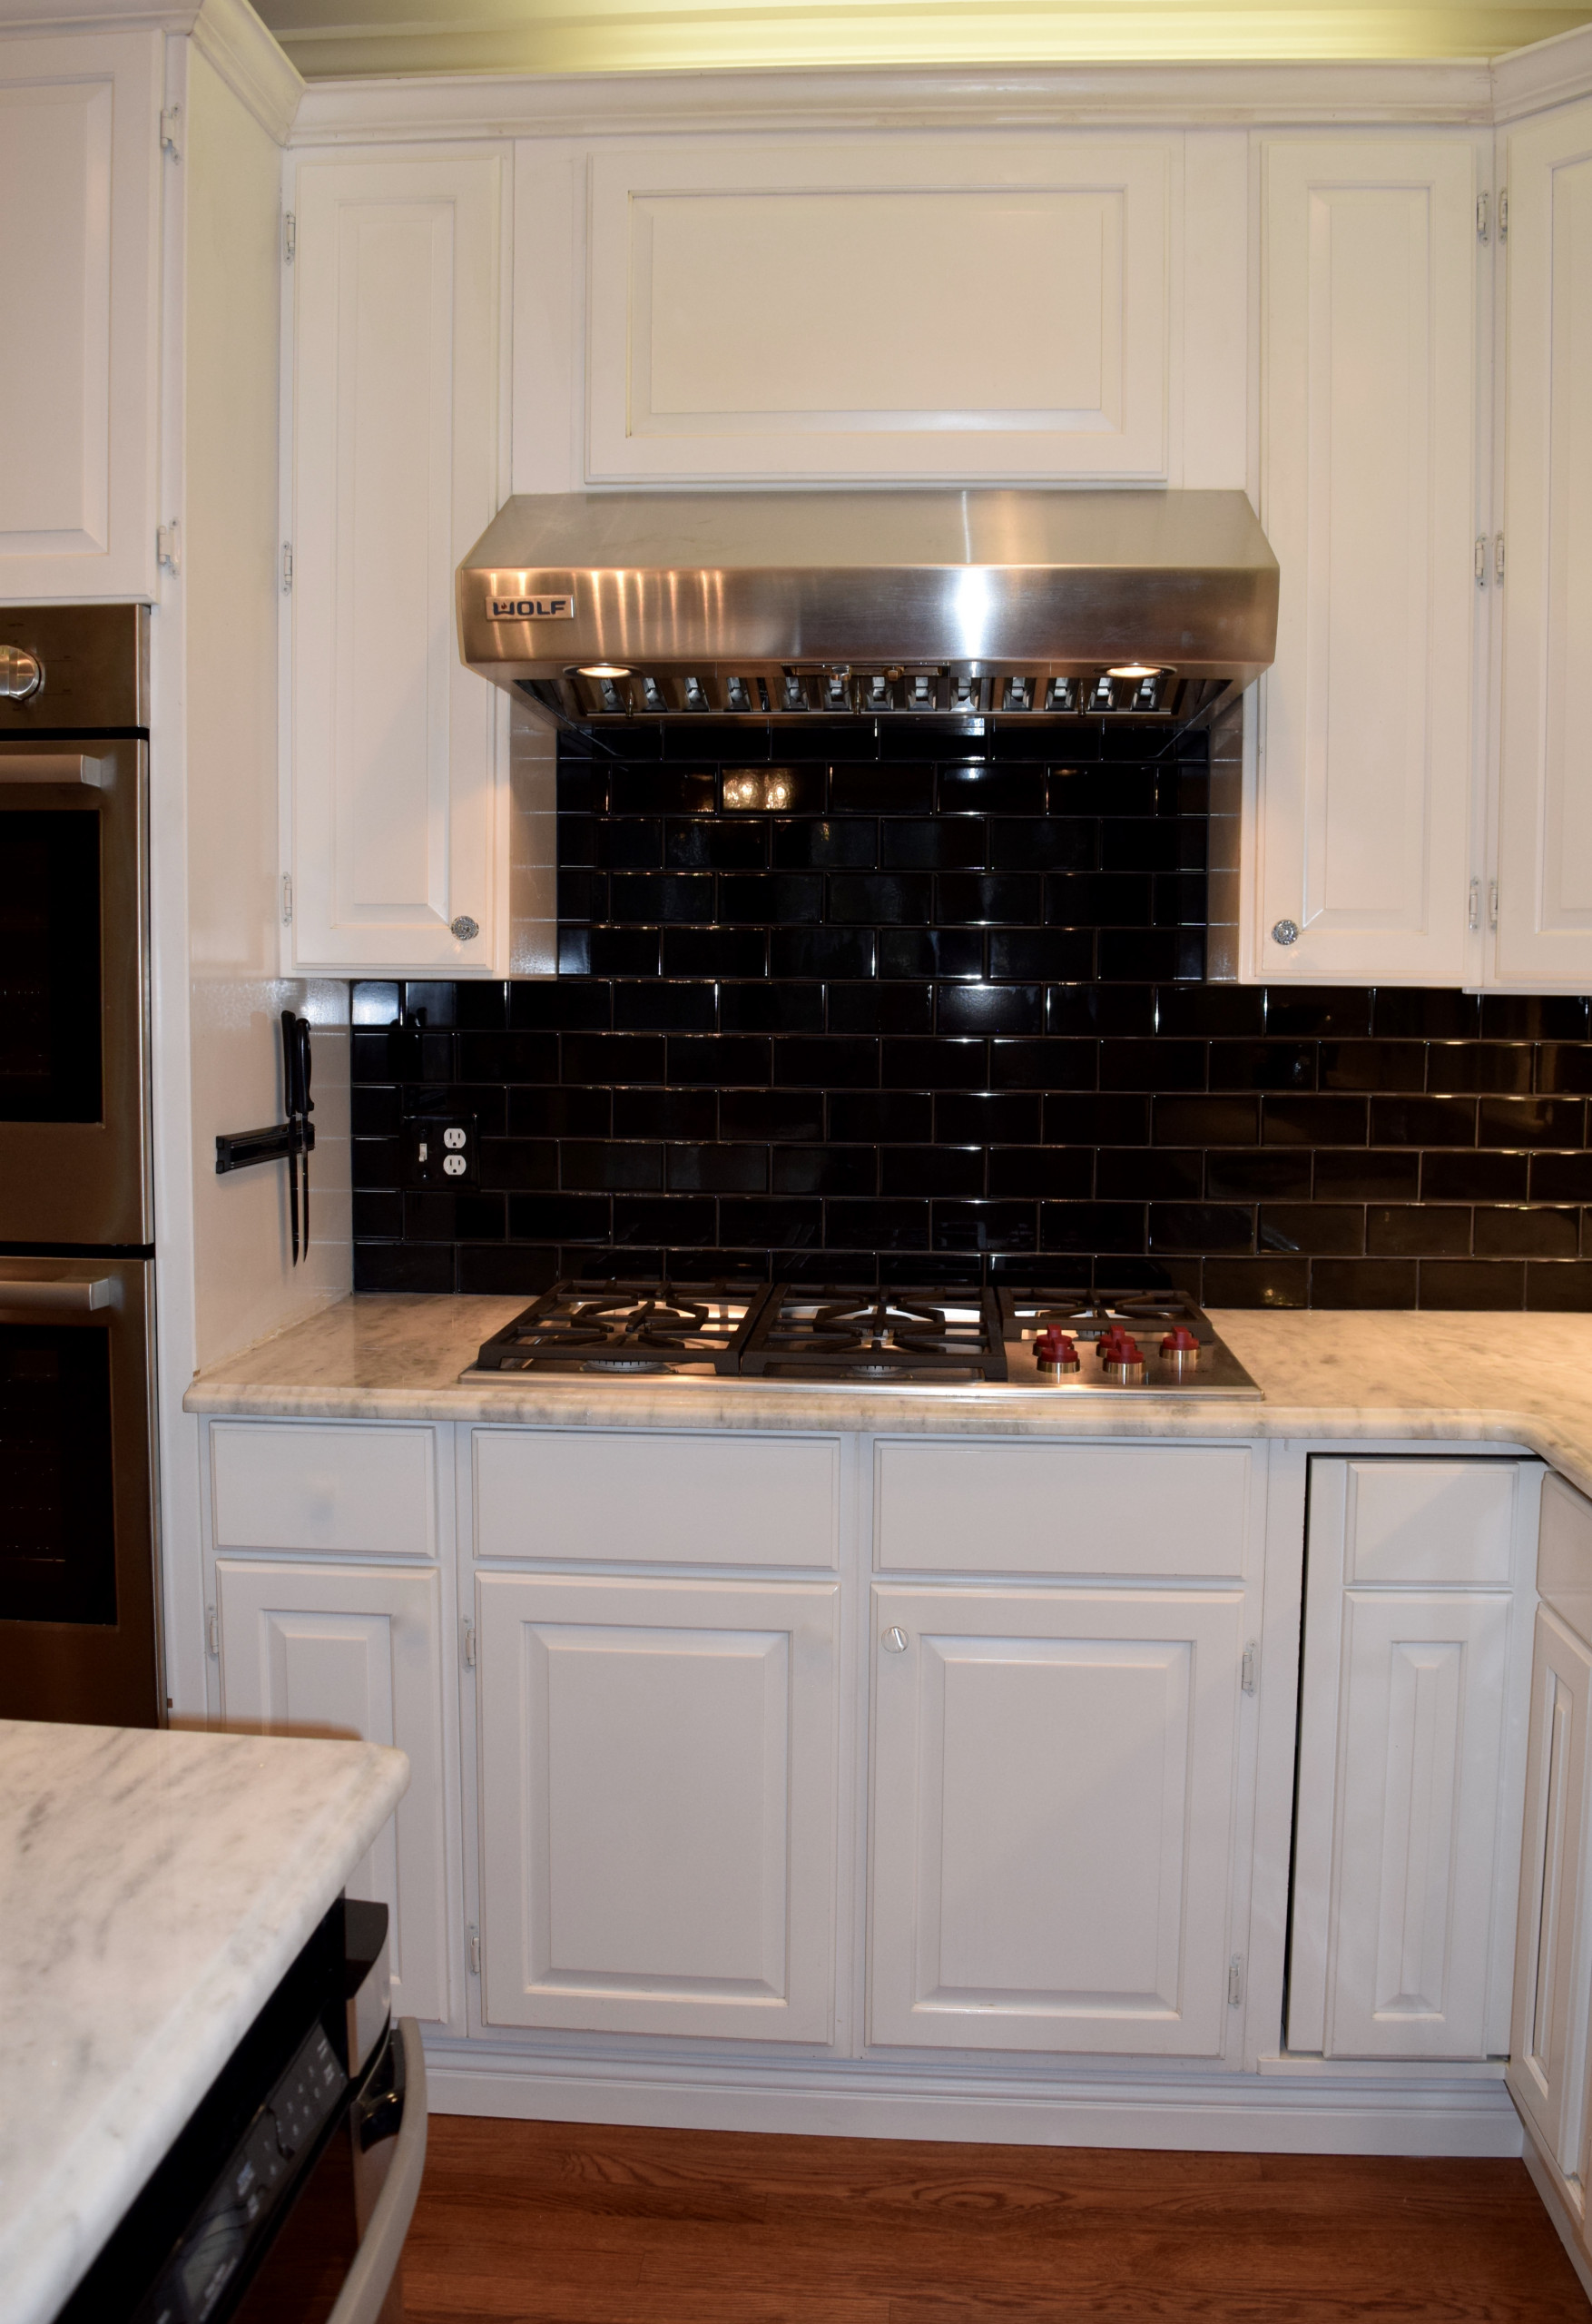 Stainless cooktop and hood with tile backsplash.